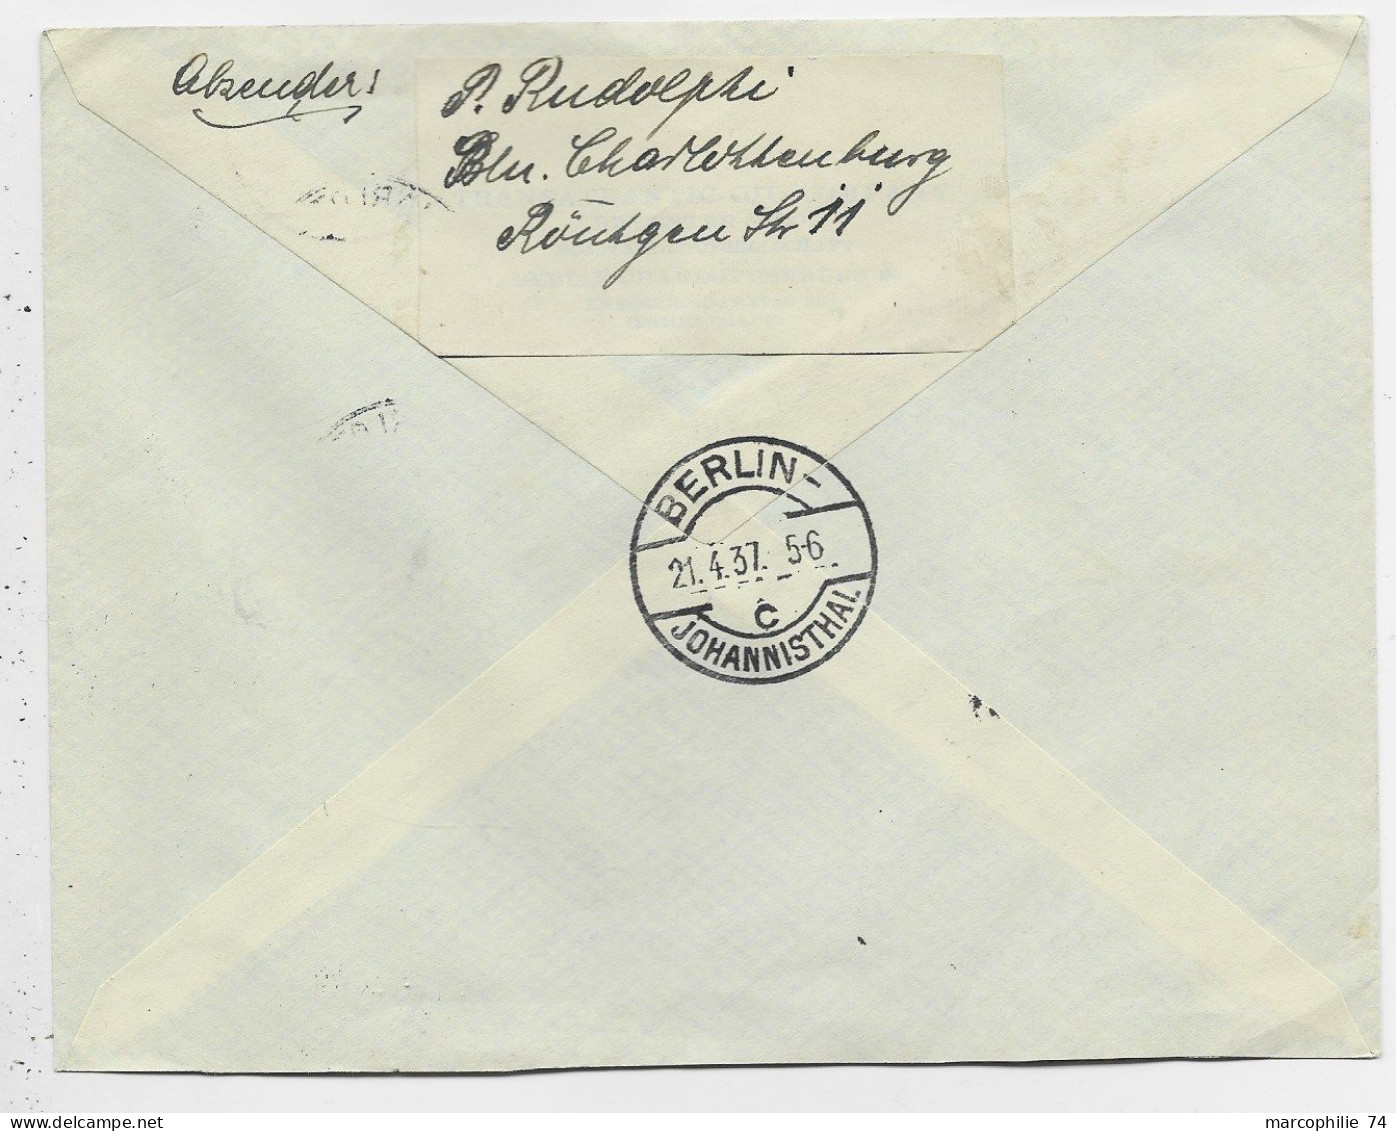 GERMANY REICH 6CX2+12CX2+2CX2 LETTRE COVER BRIEF REC BERLIN CHARLOTTENBURG 20.4.1937 TO GERMANY - Covers & Documents